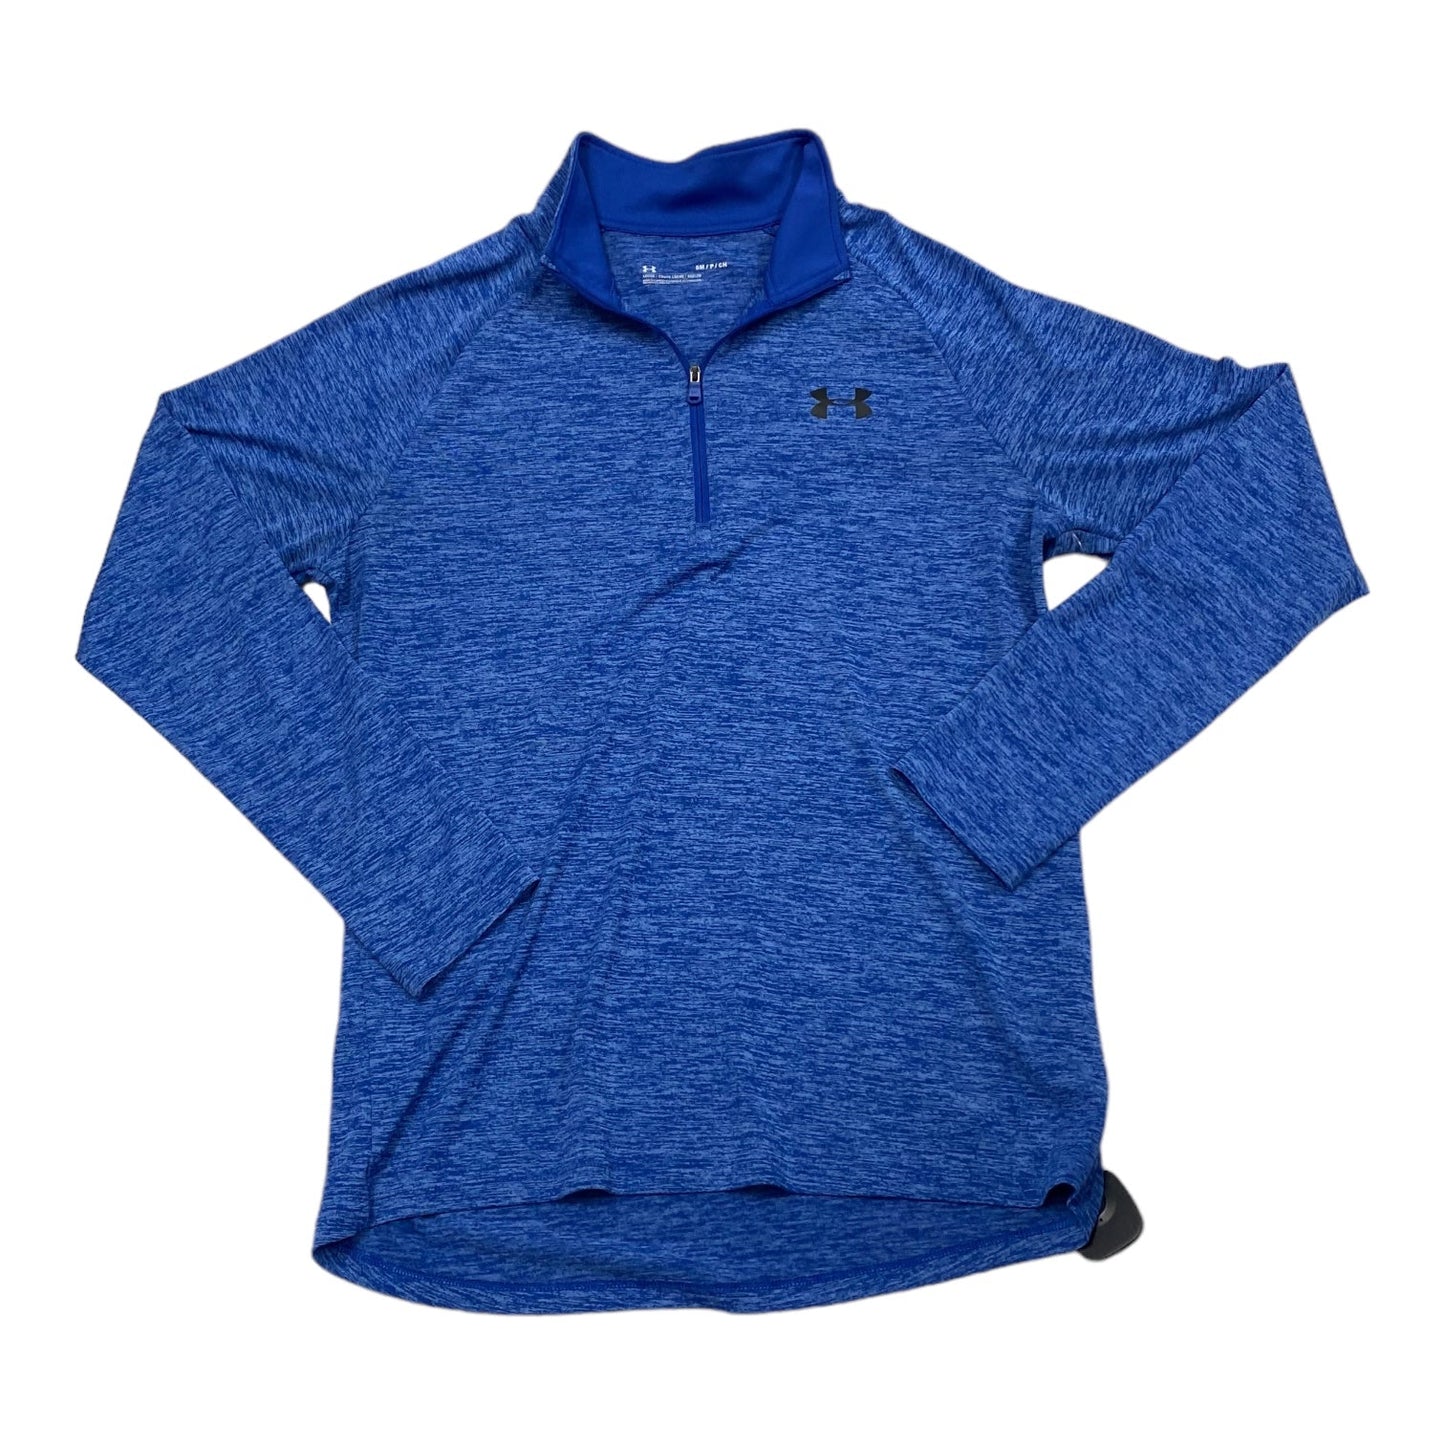 Blue Athletic Top Long Sleeve Collar Under Armour, Size S